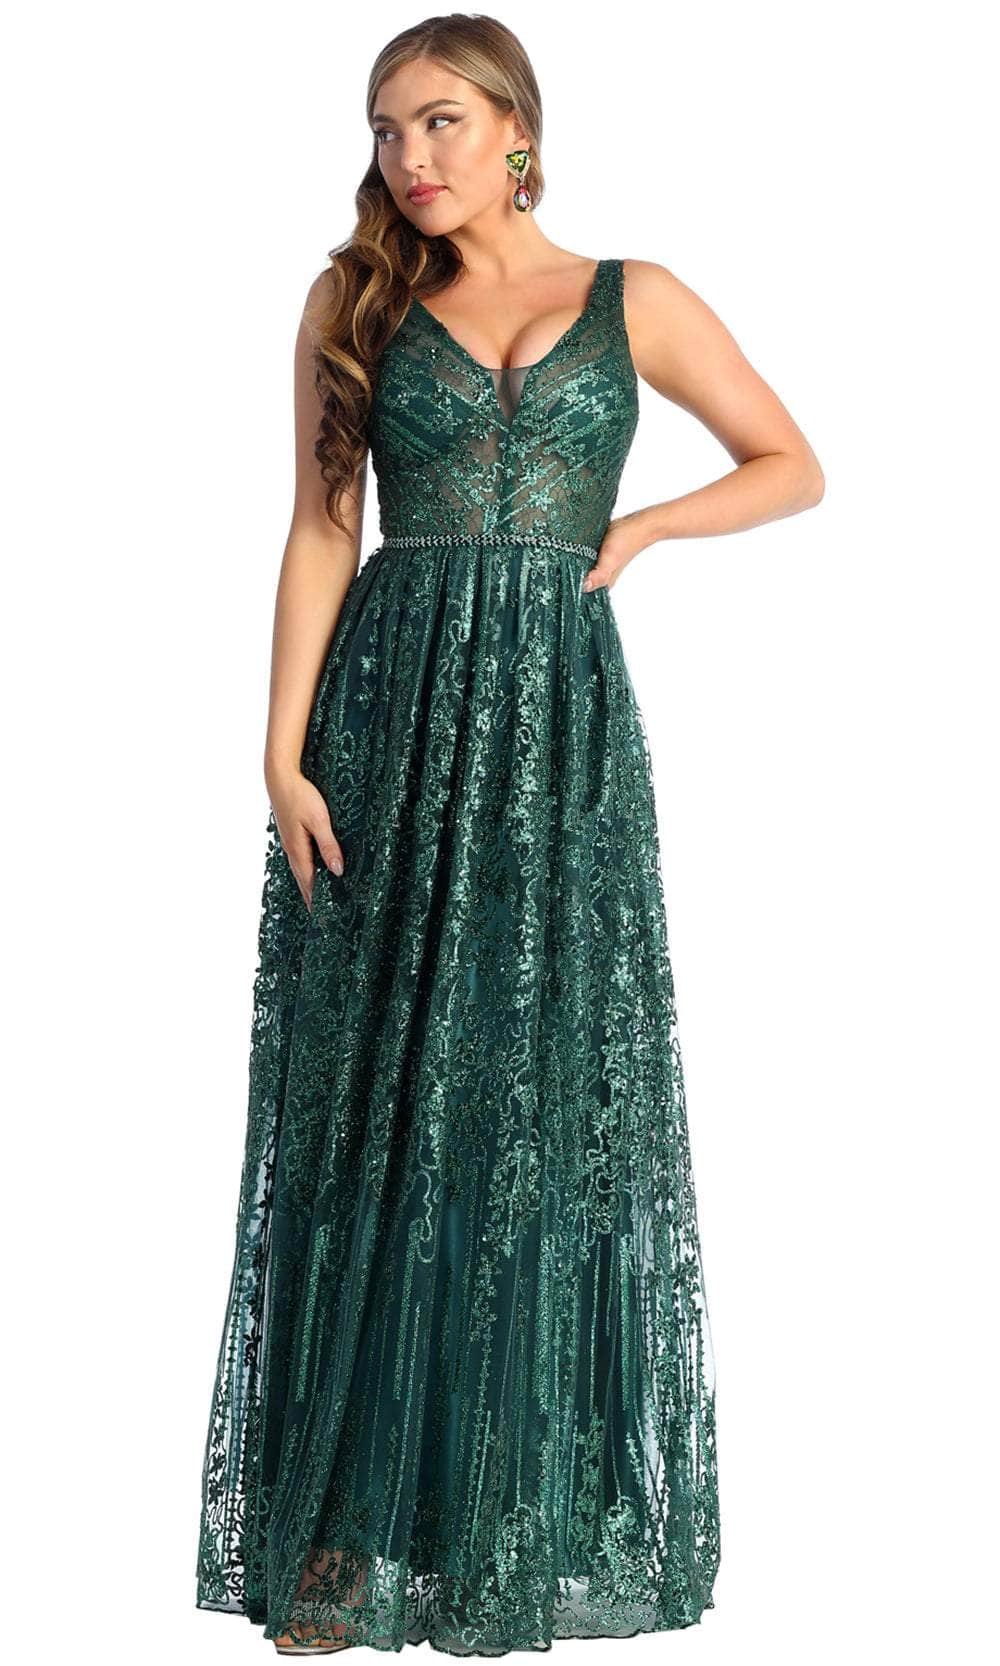 Image of May Queen RQ7948 - Embroidered Illusion Bodice Dress